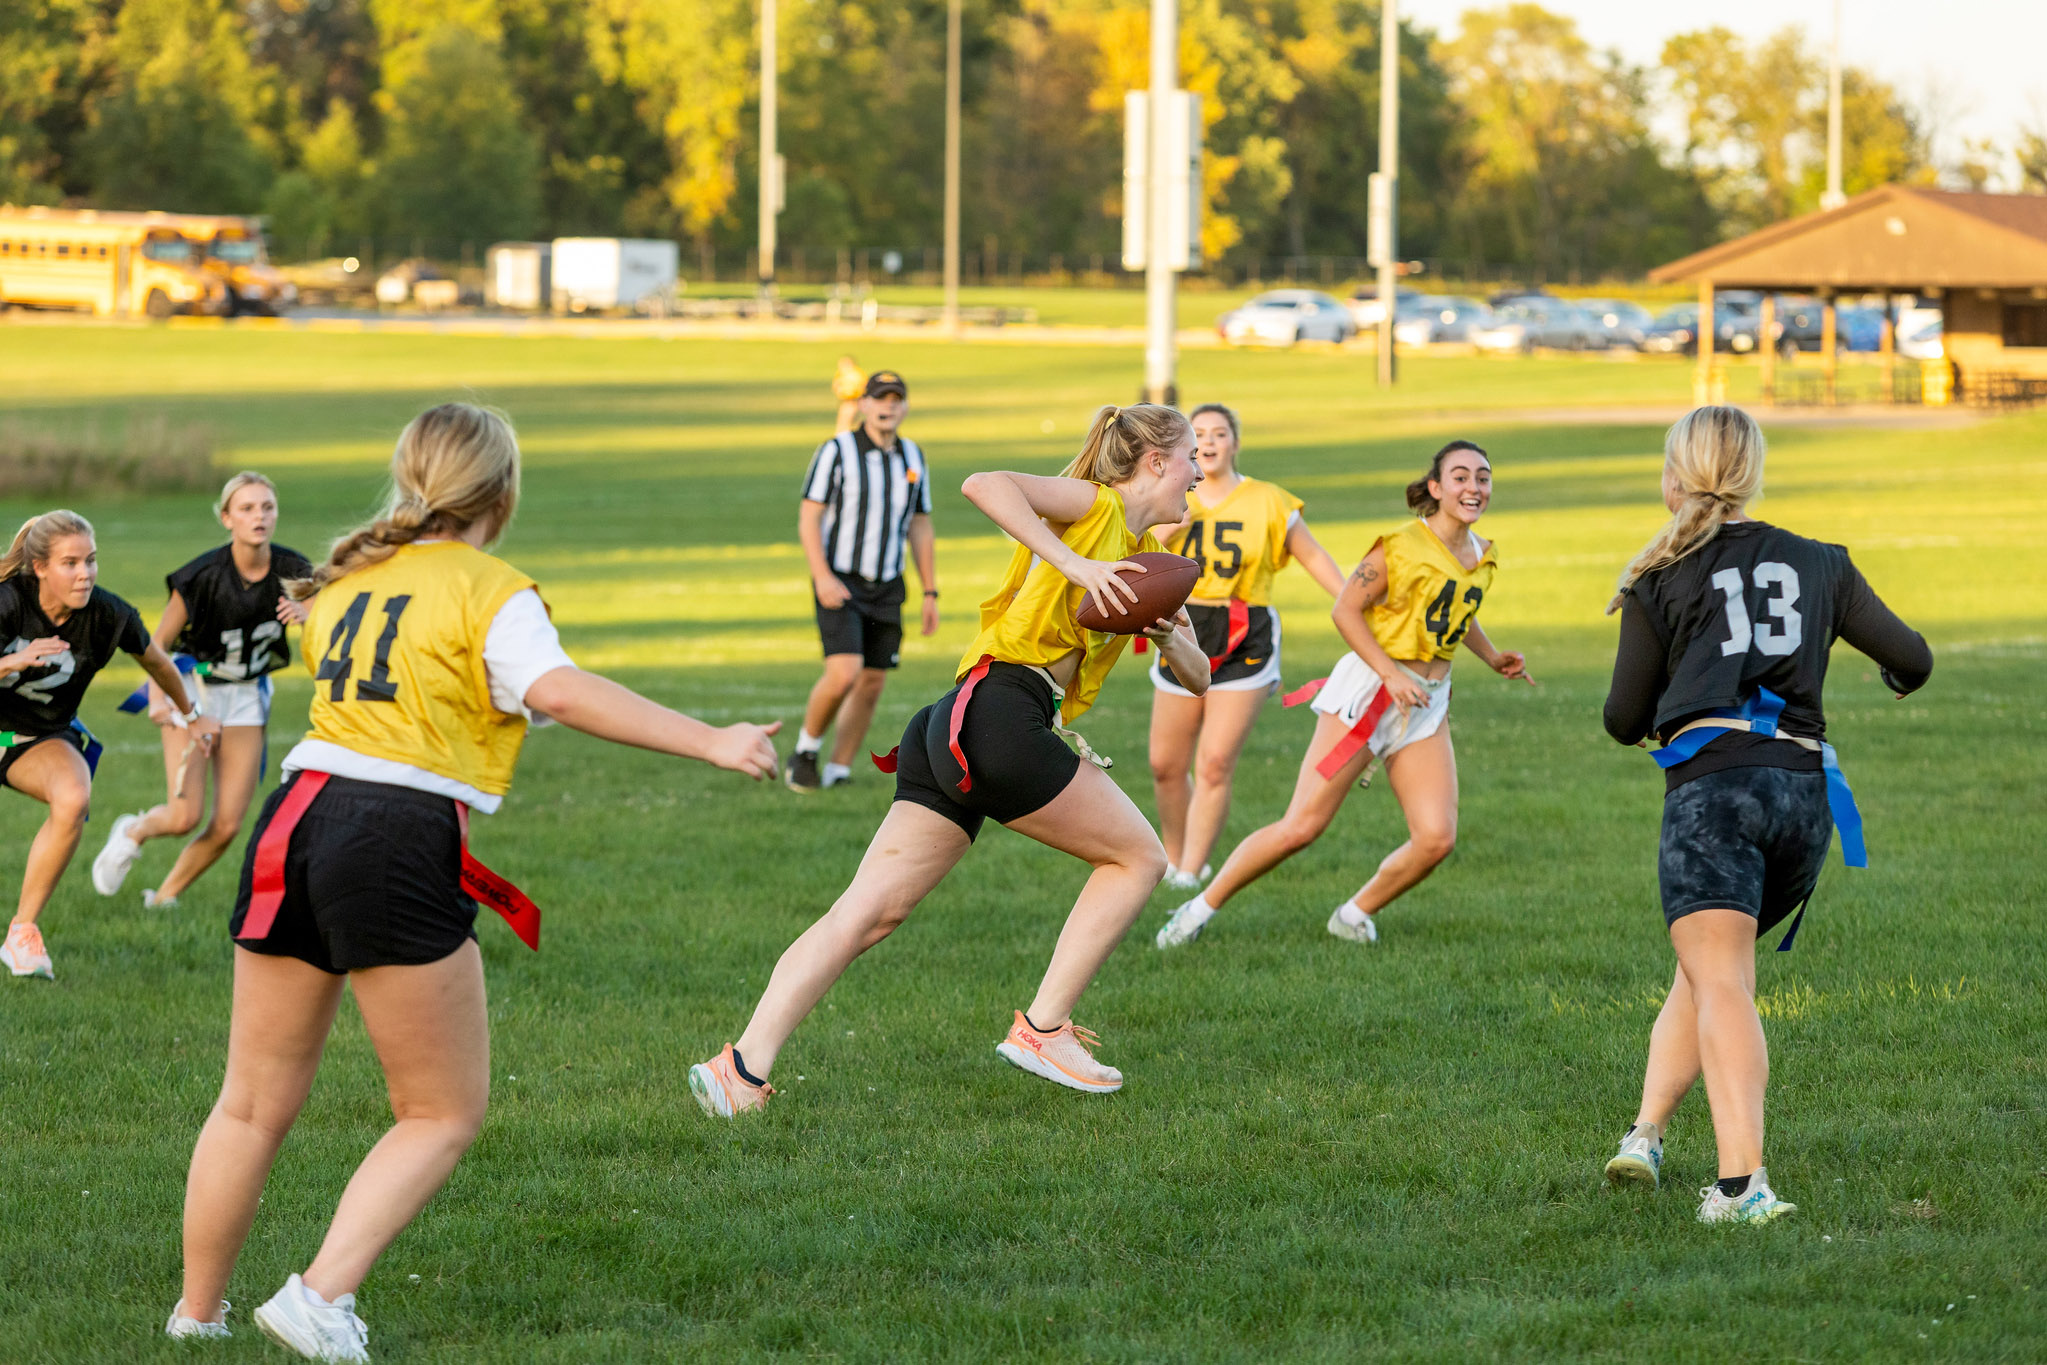 Students playing flag football outside on the grass